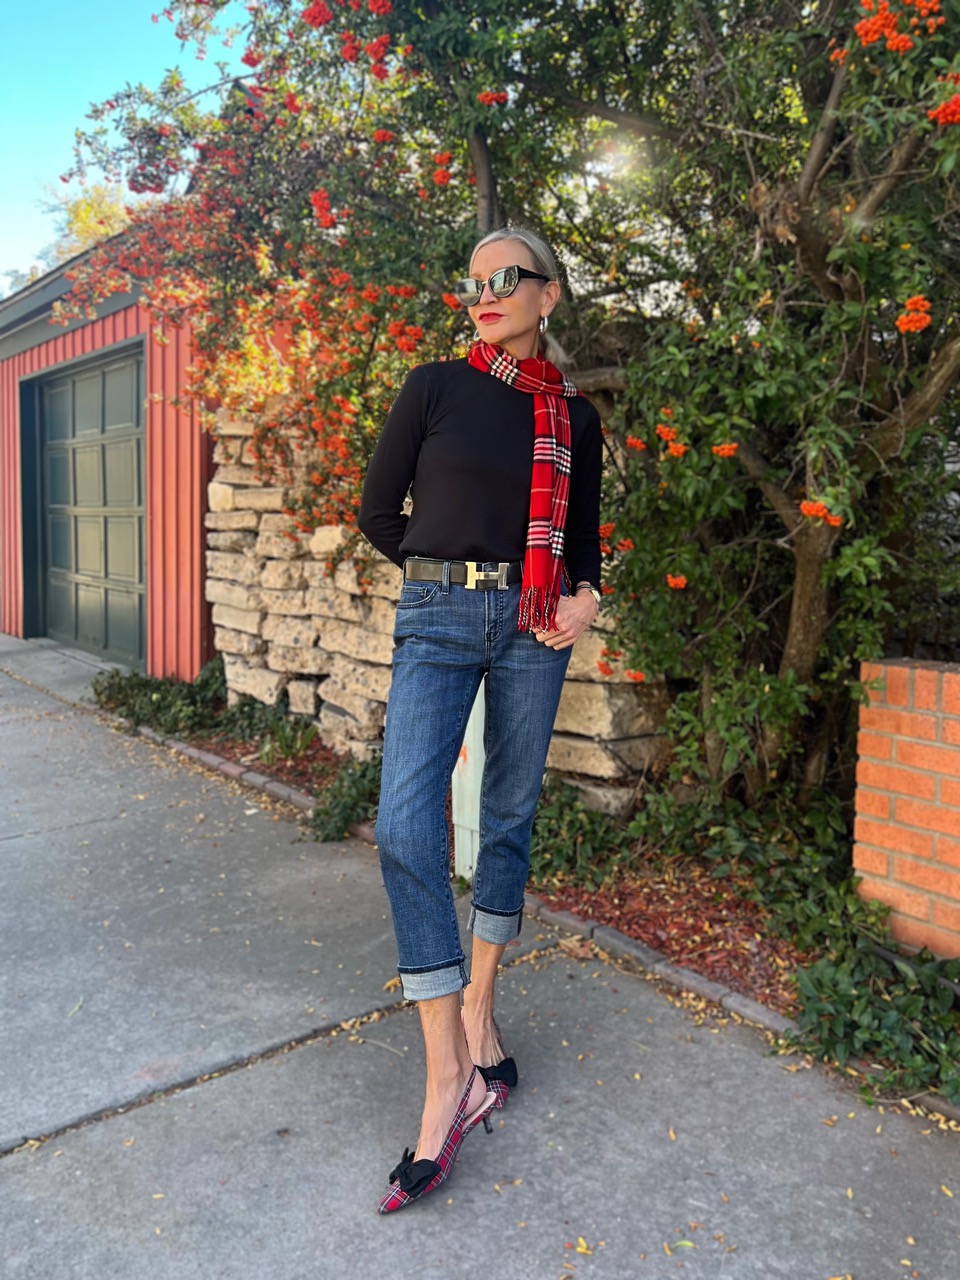 Lifestyle Influencer, Jamie Lewinger of More Than Turquoise wearing the Debra sling back from Jack Rogers